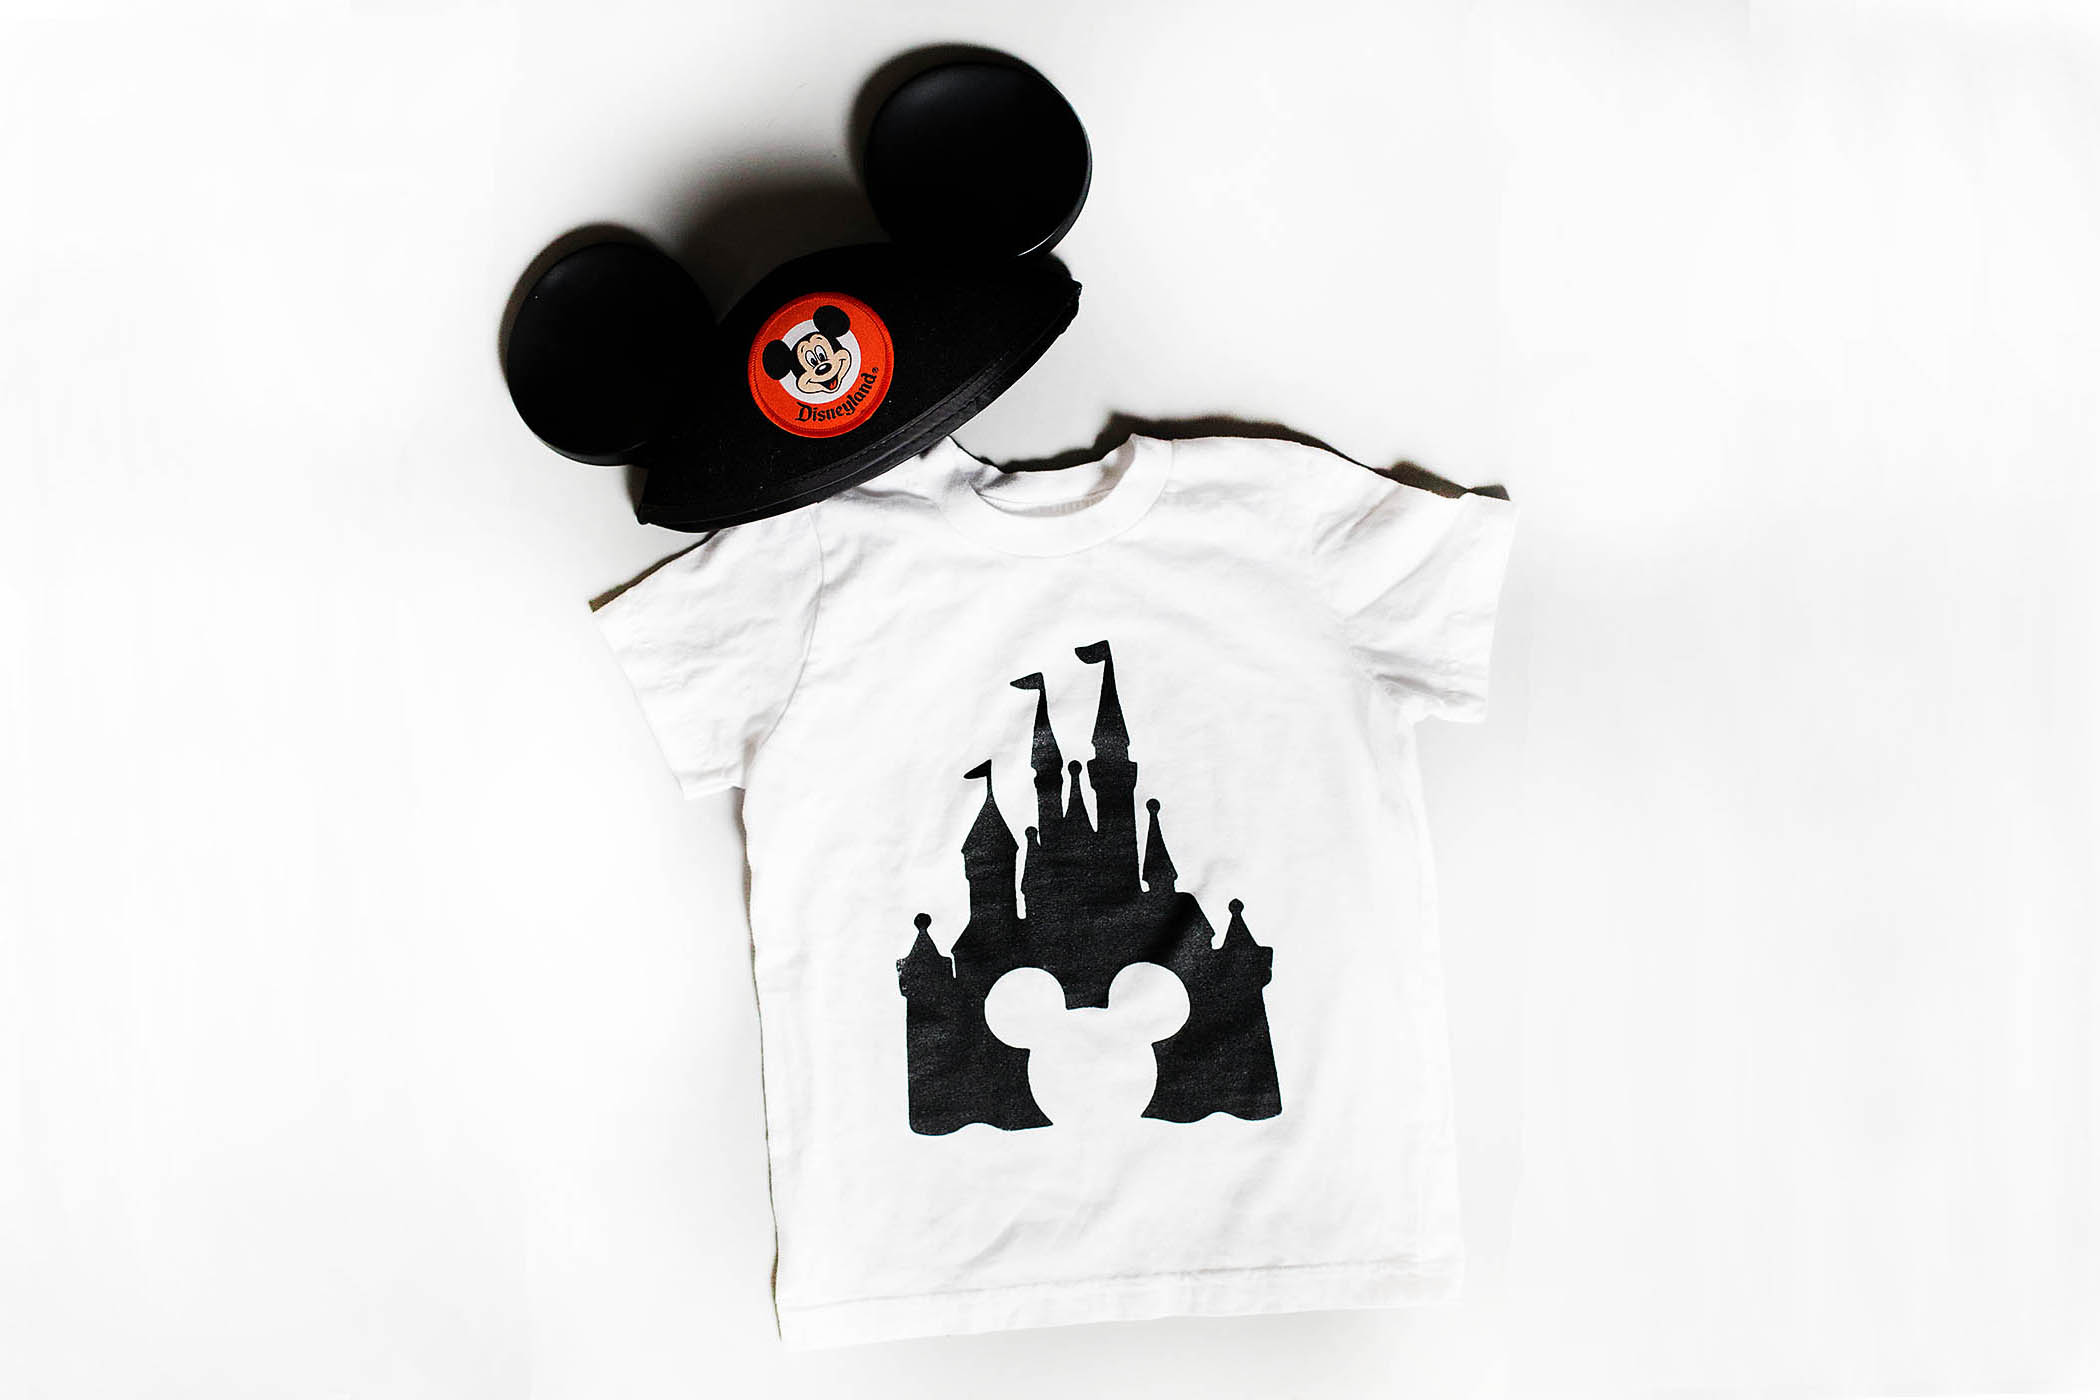 DIY Mickey tee perfect for any Disney event